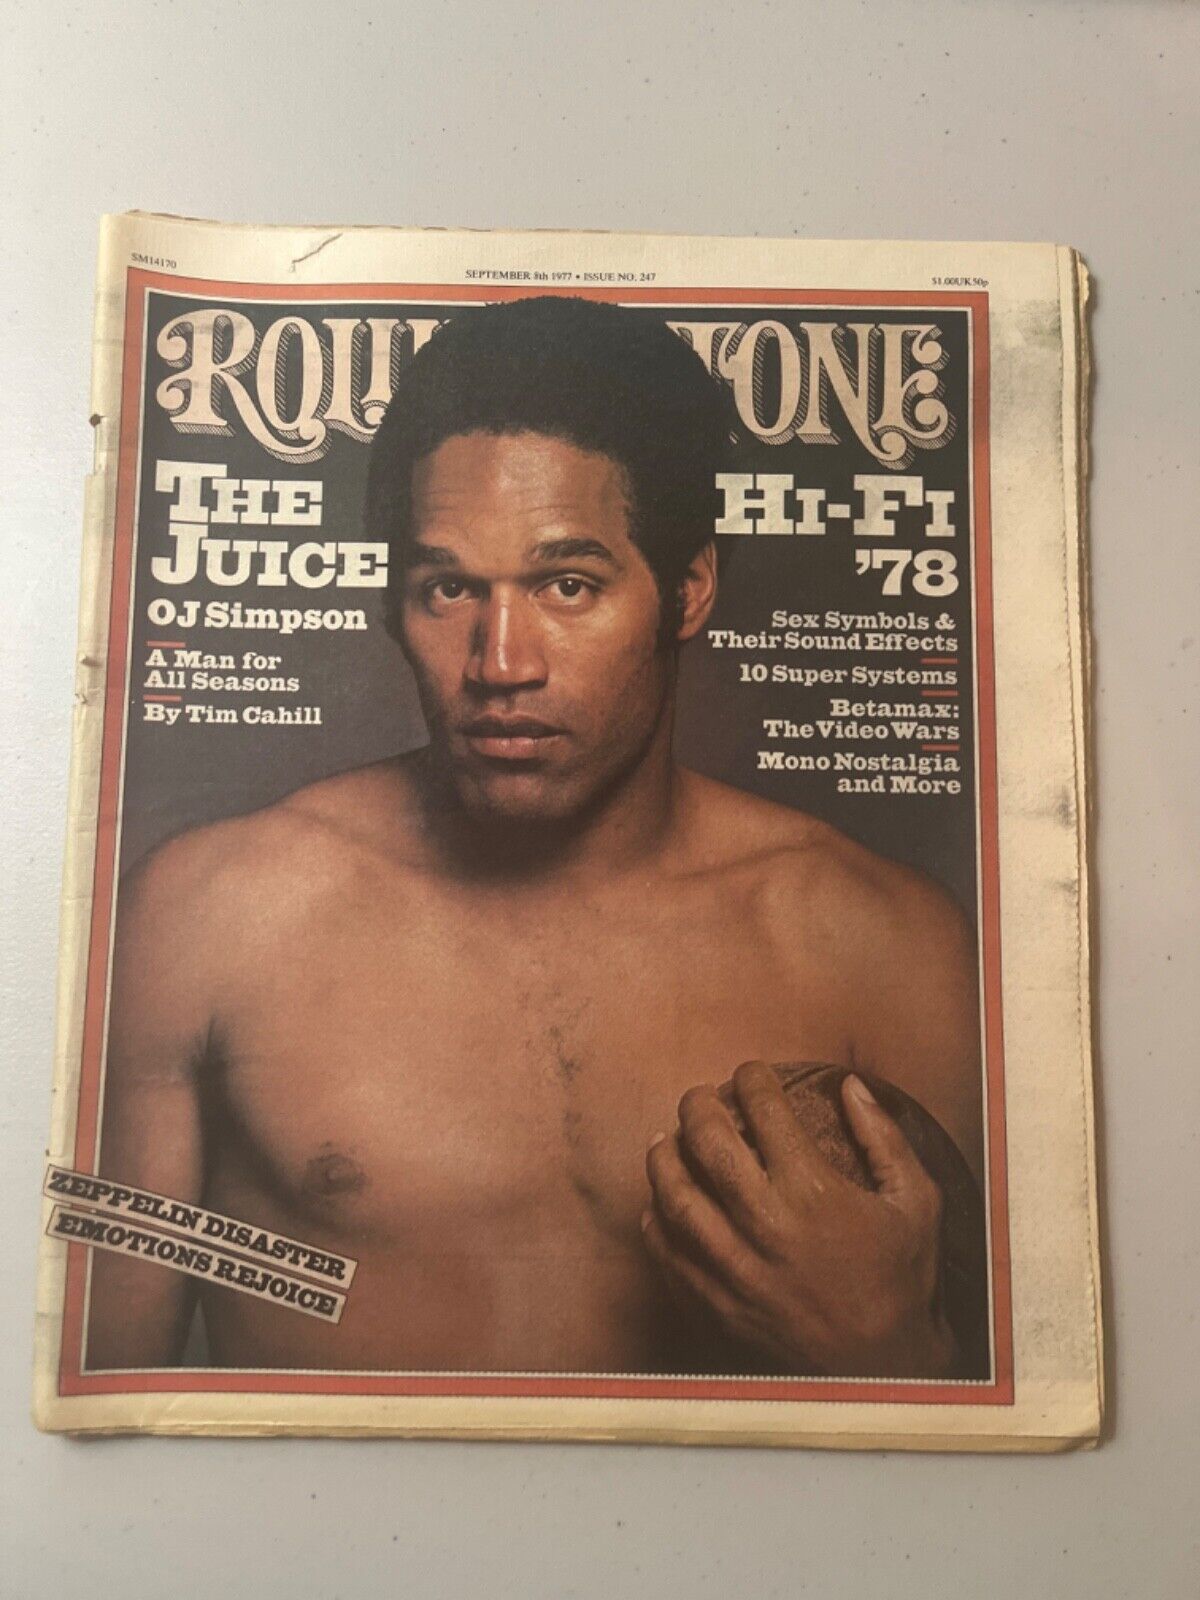 Rolling Stone Magazine Issue No. 247  September 8, 1977  O.J. Simpson  Cover